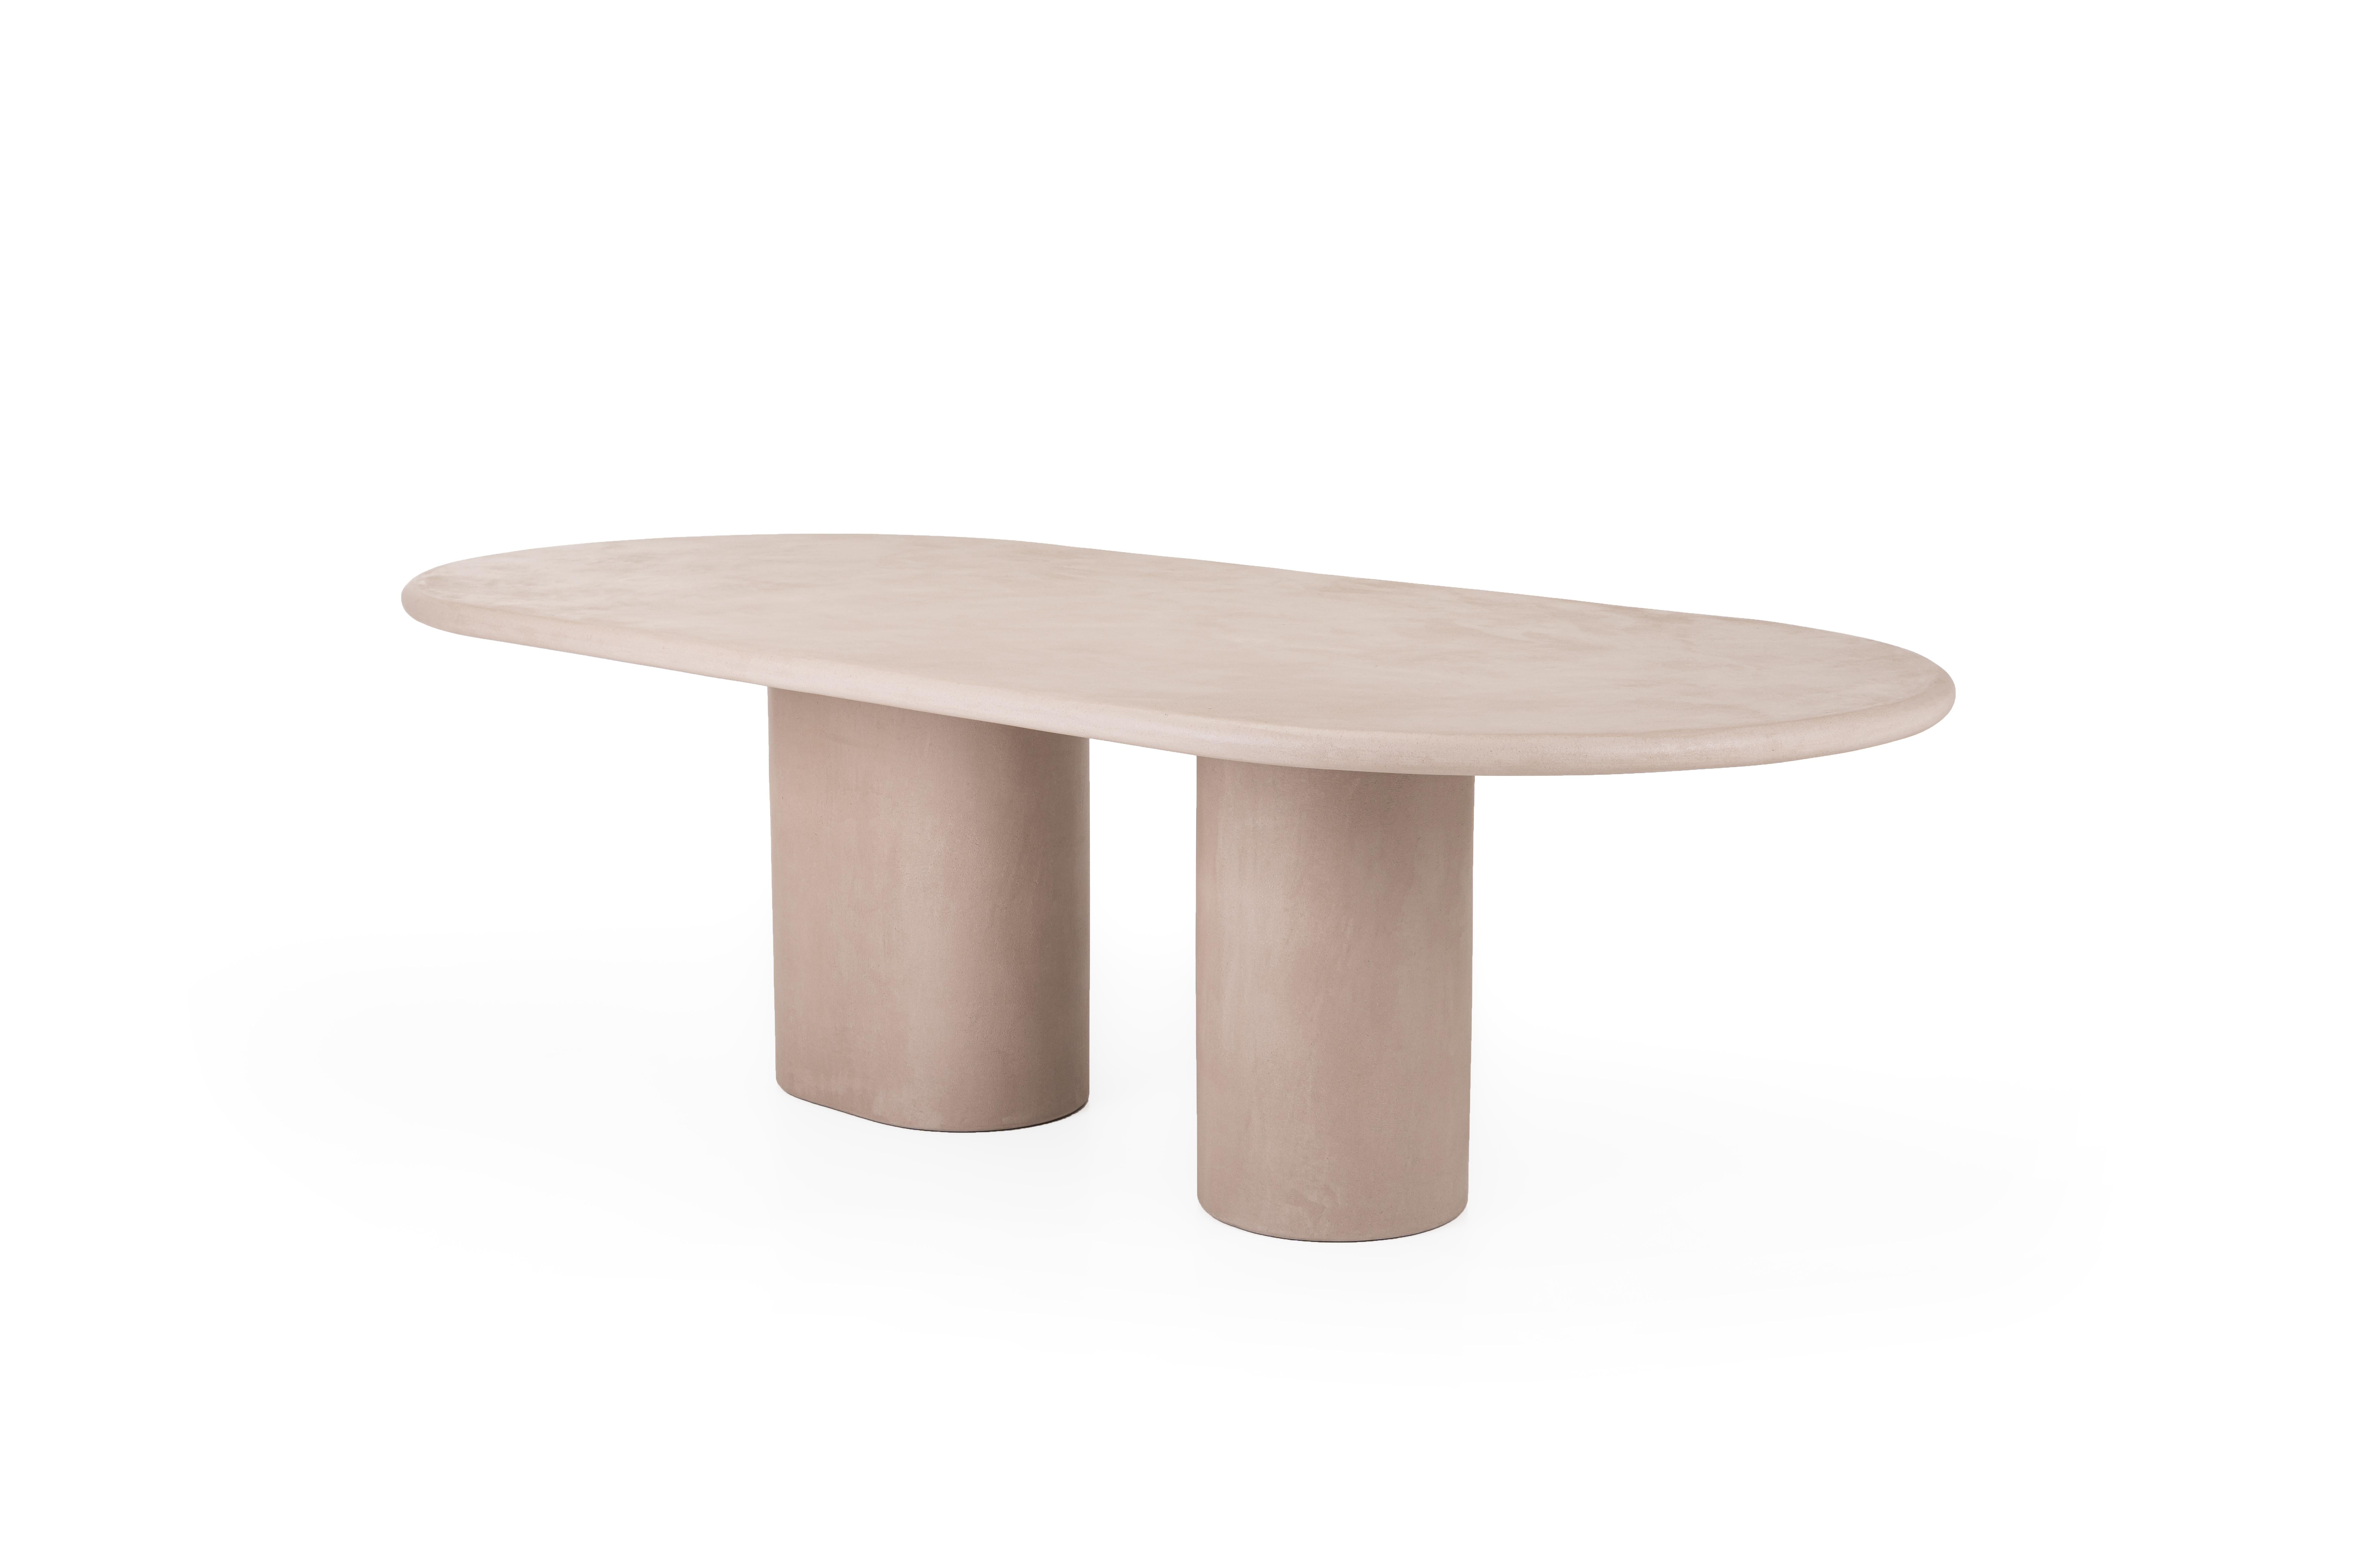 Mortex Dining Table "Column" 320 by Isabelle Beaumont